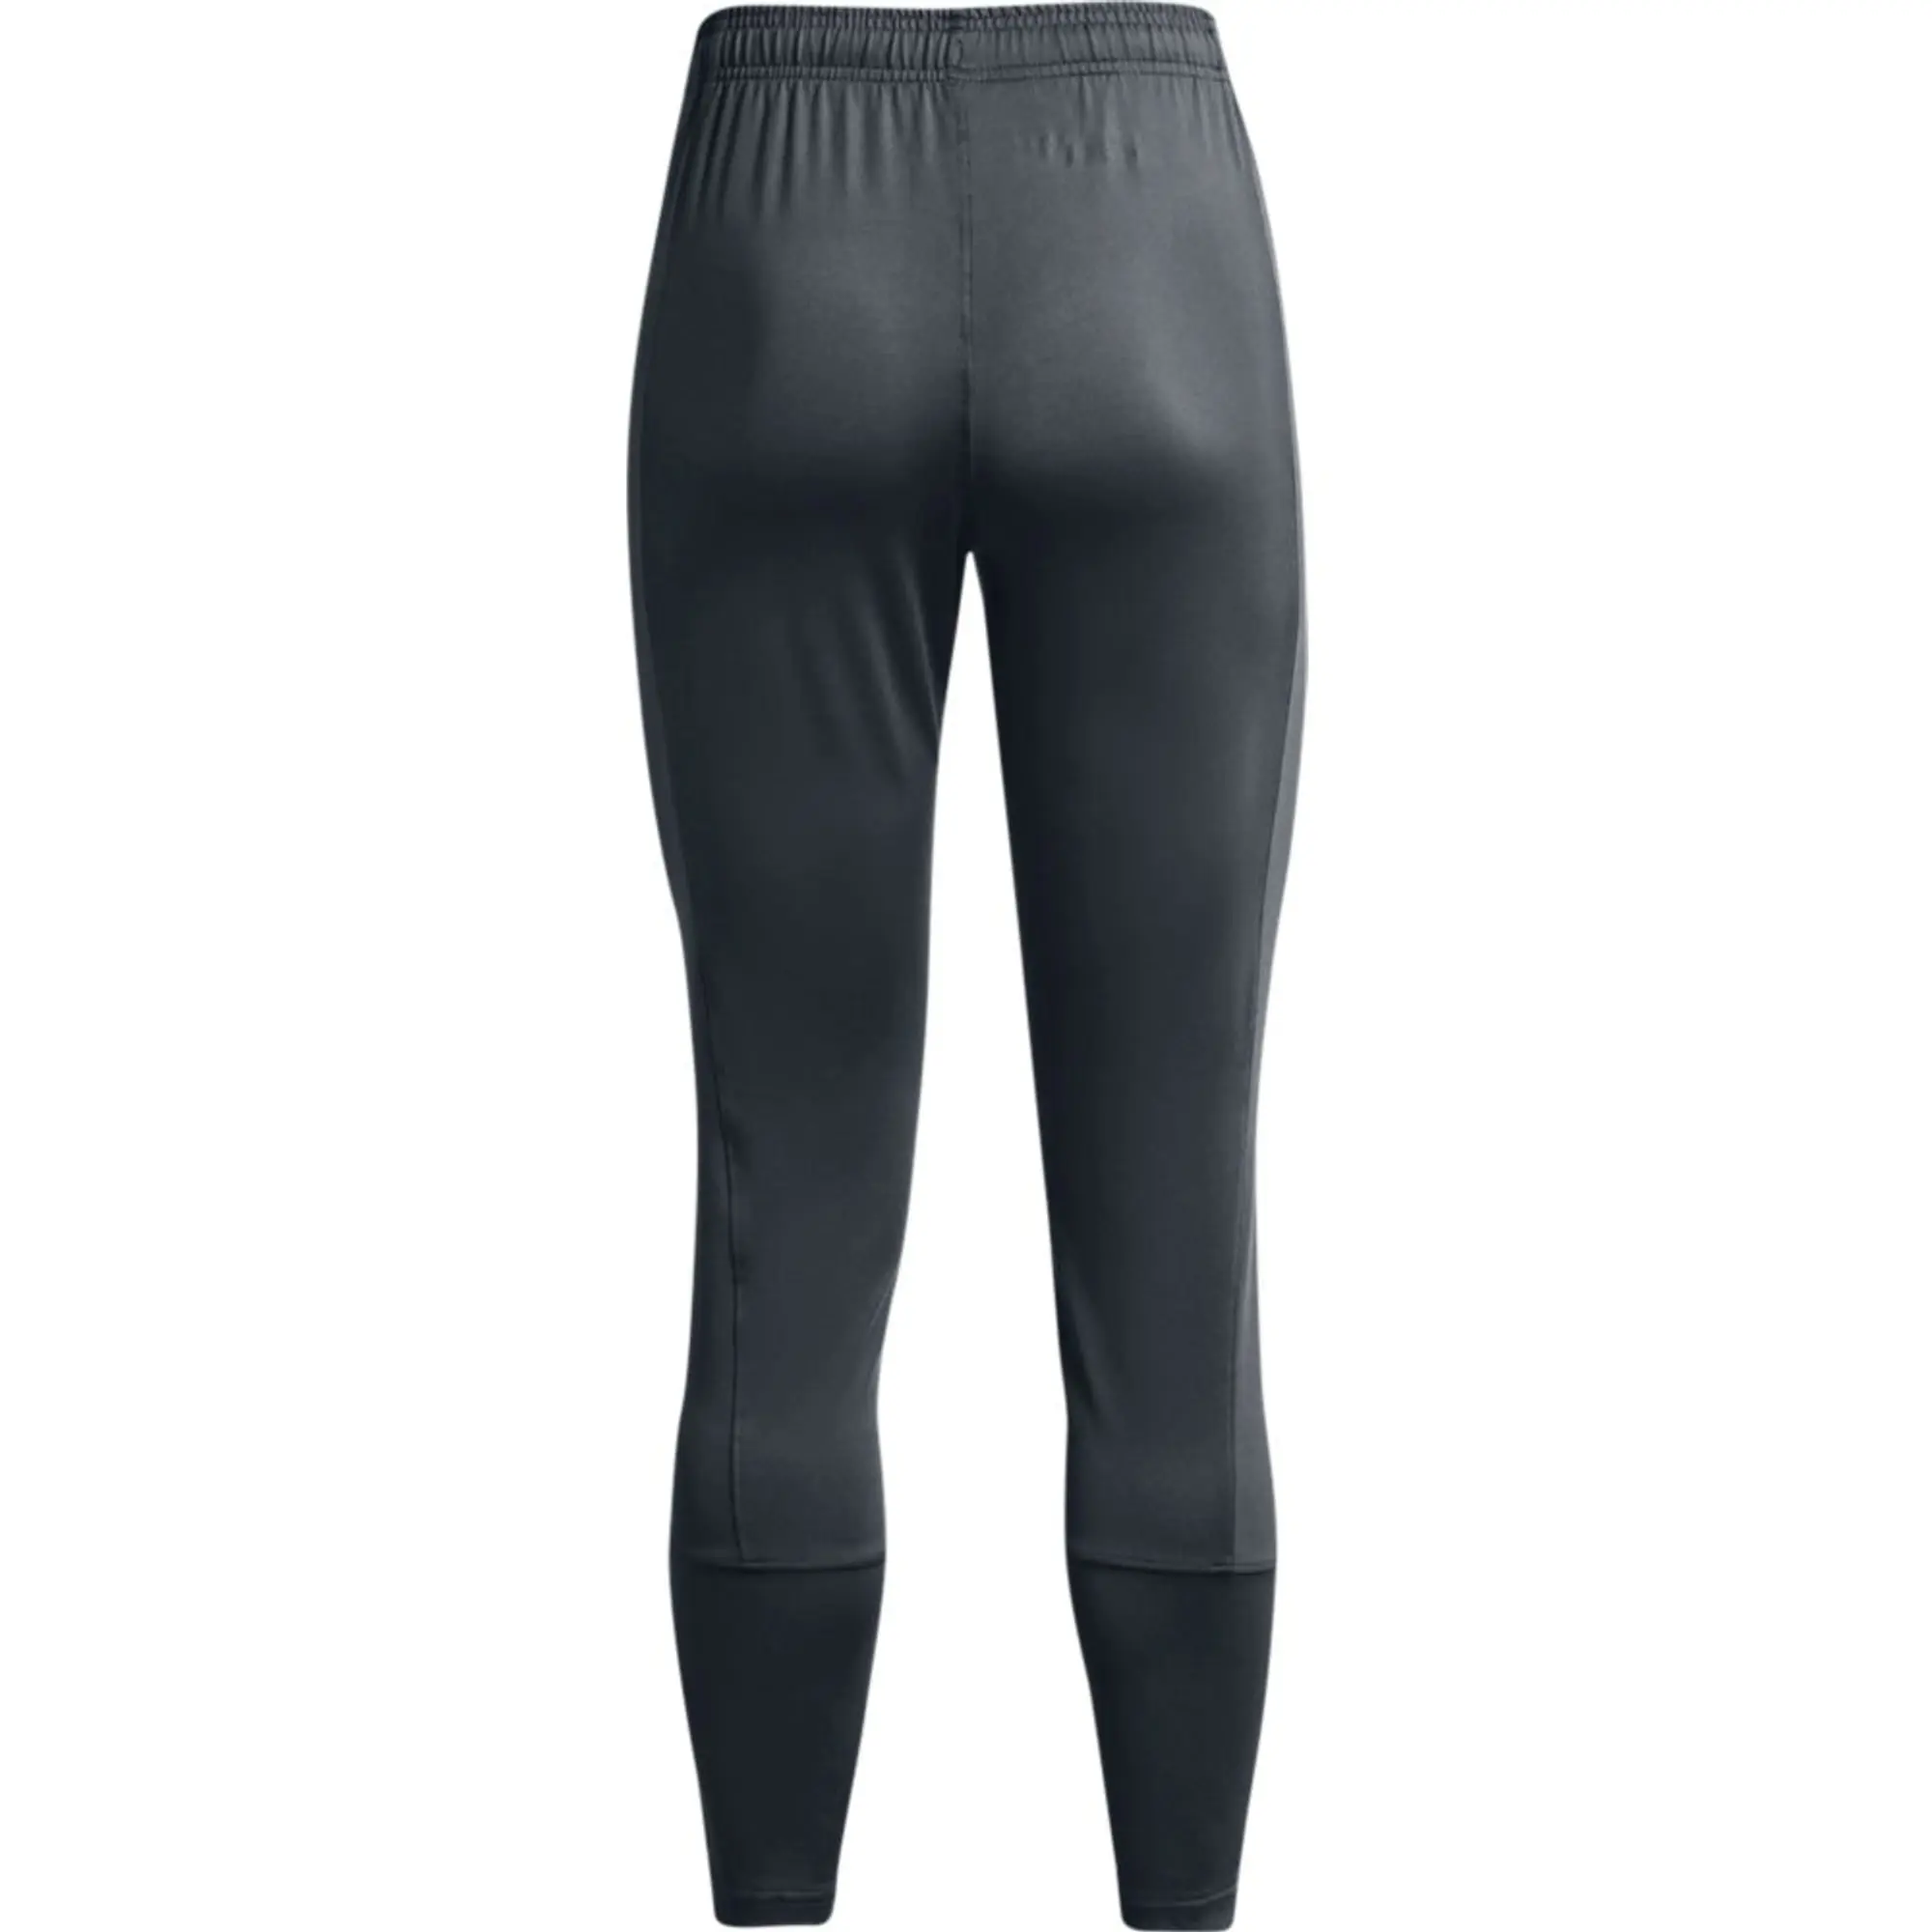 Under Armour Challenger Training Pants - Pitch Gray - Womens